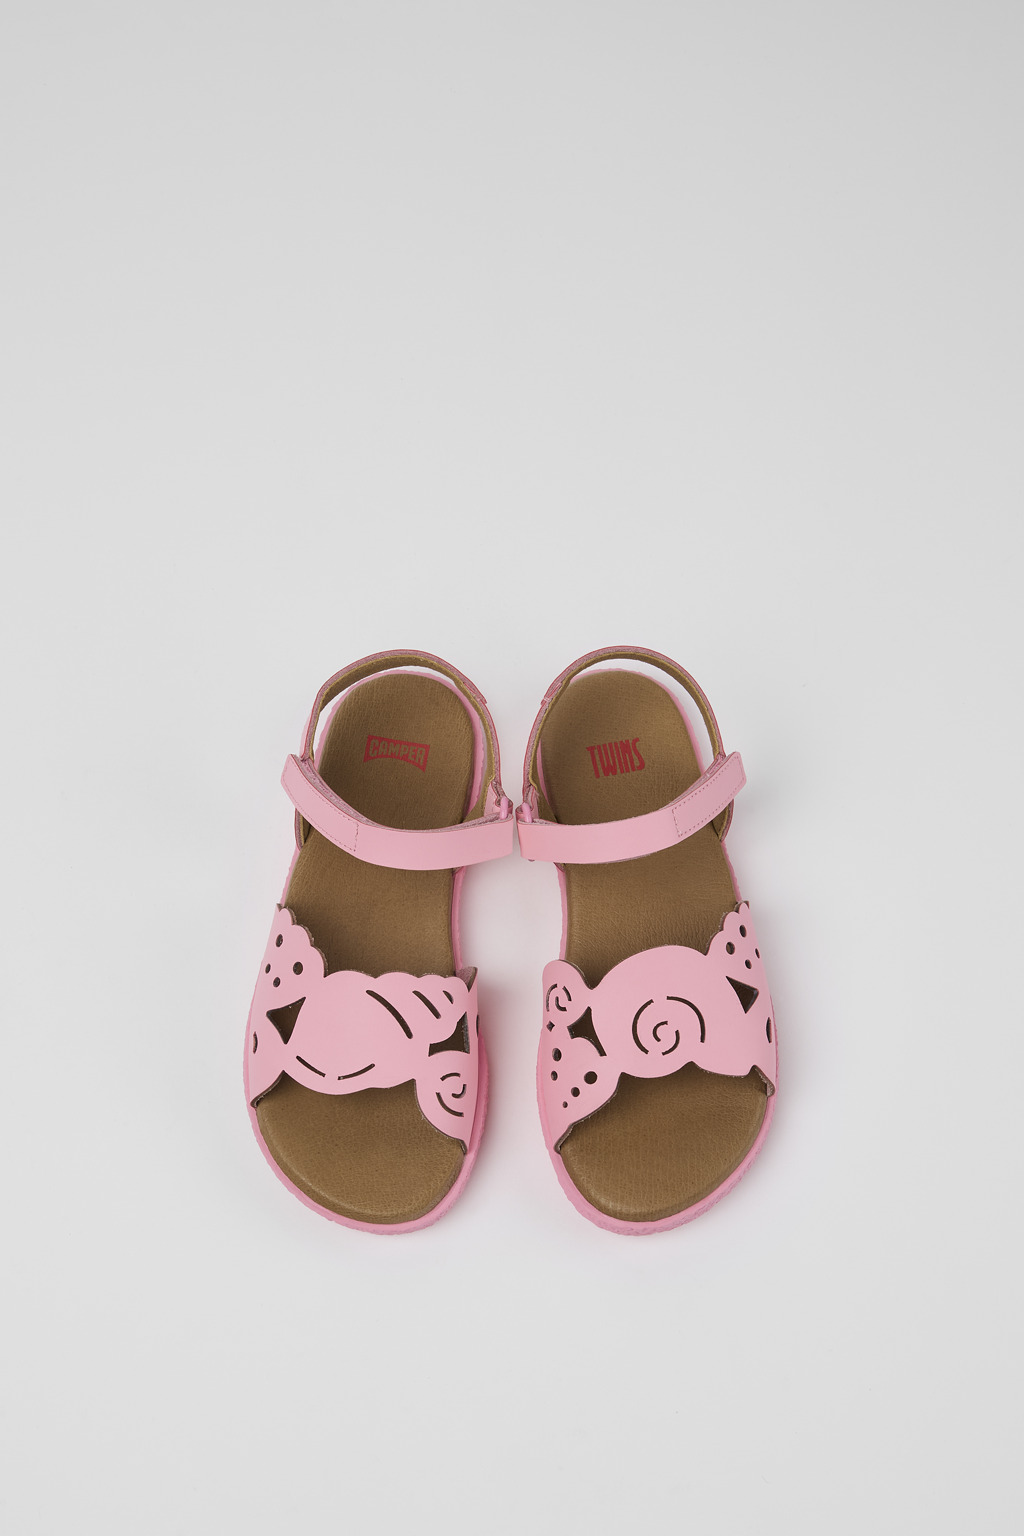 So Lovely Baby Girl Crib Shoes Infant First Step Trainers Toddler Summer  Sandals | eBay